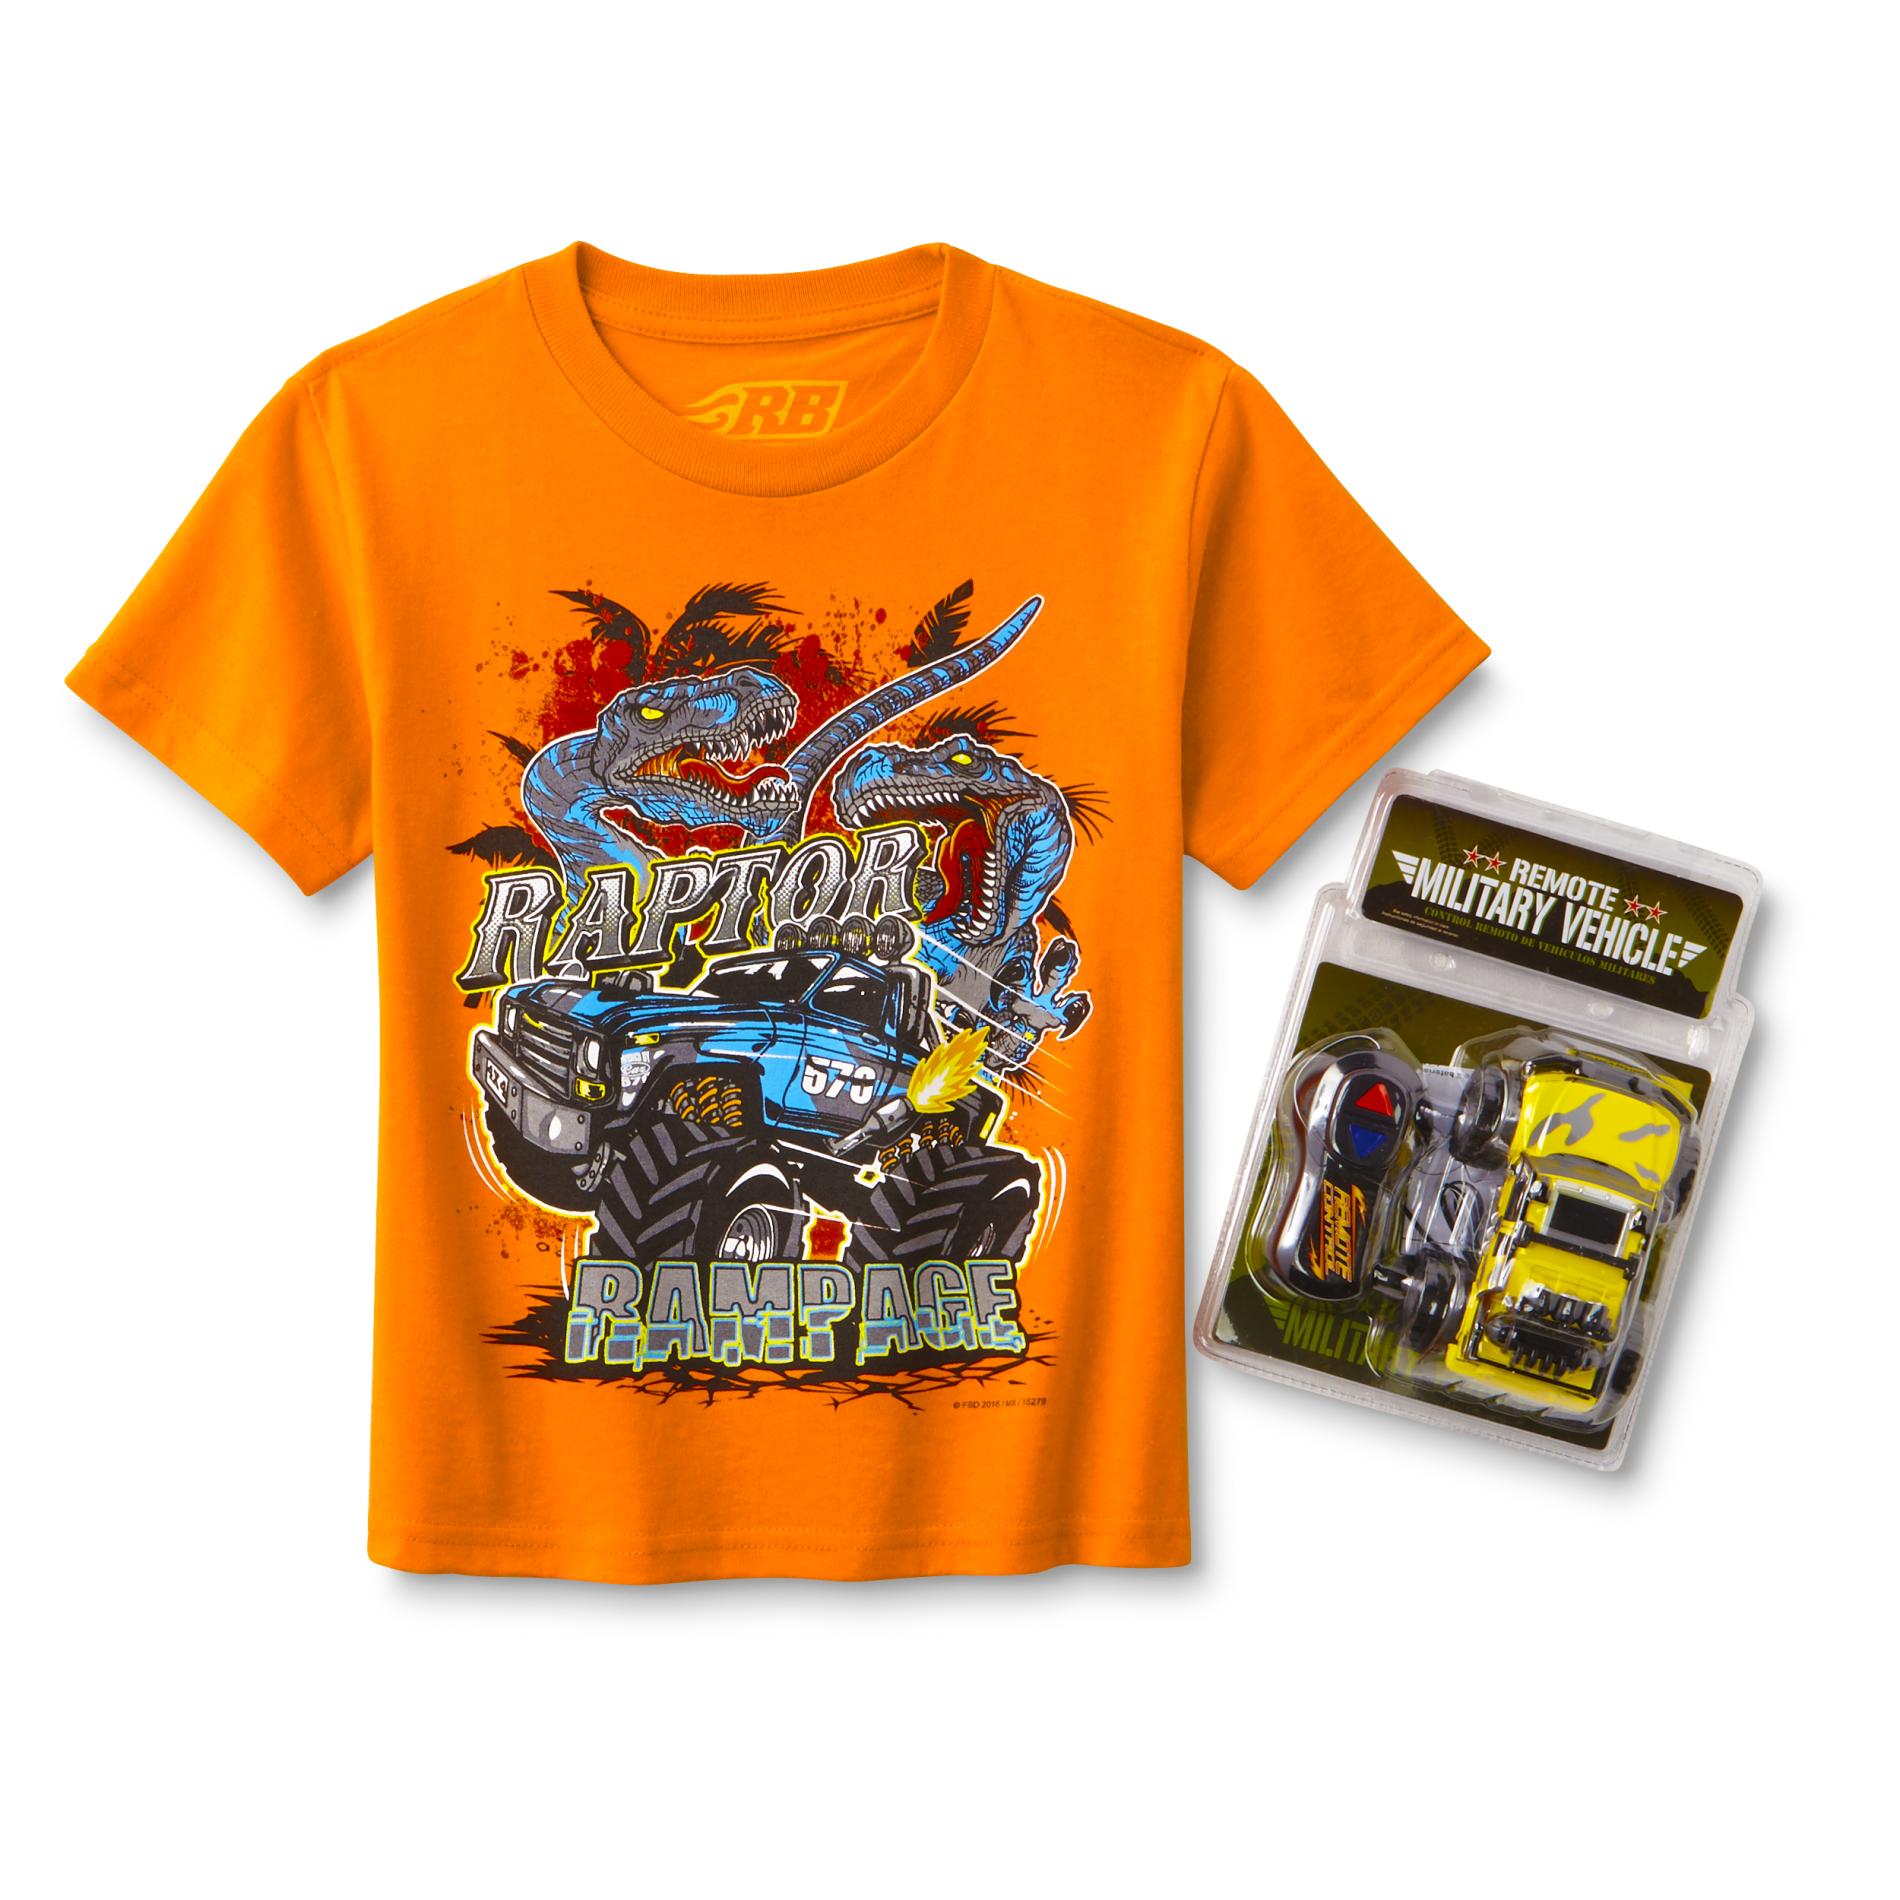 Boy's Graphic T-Shirt & Remote Control Vehicle Toy